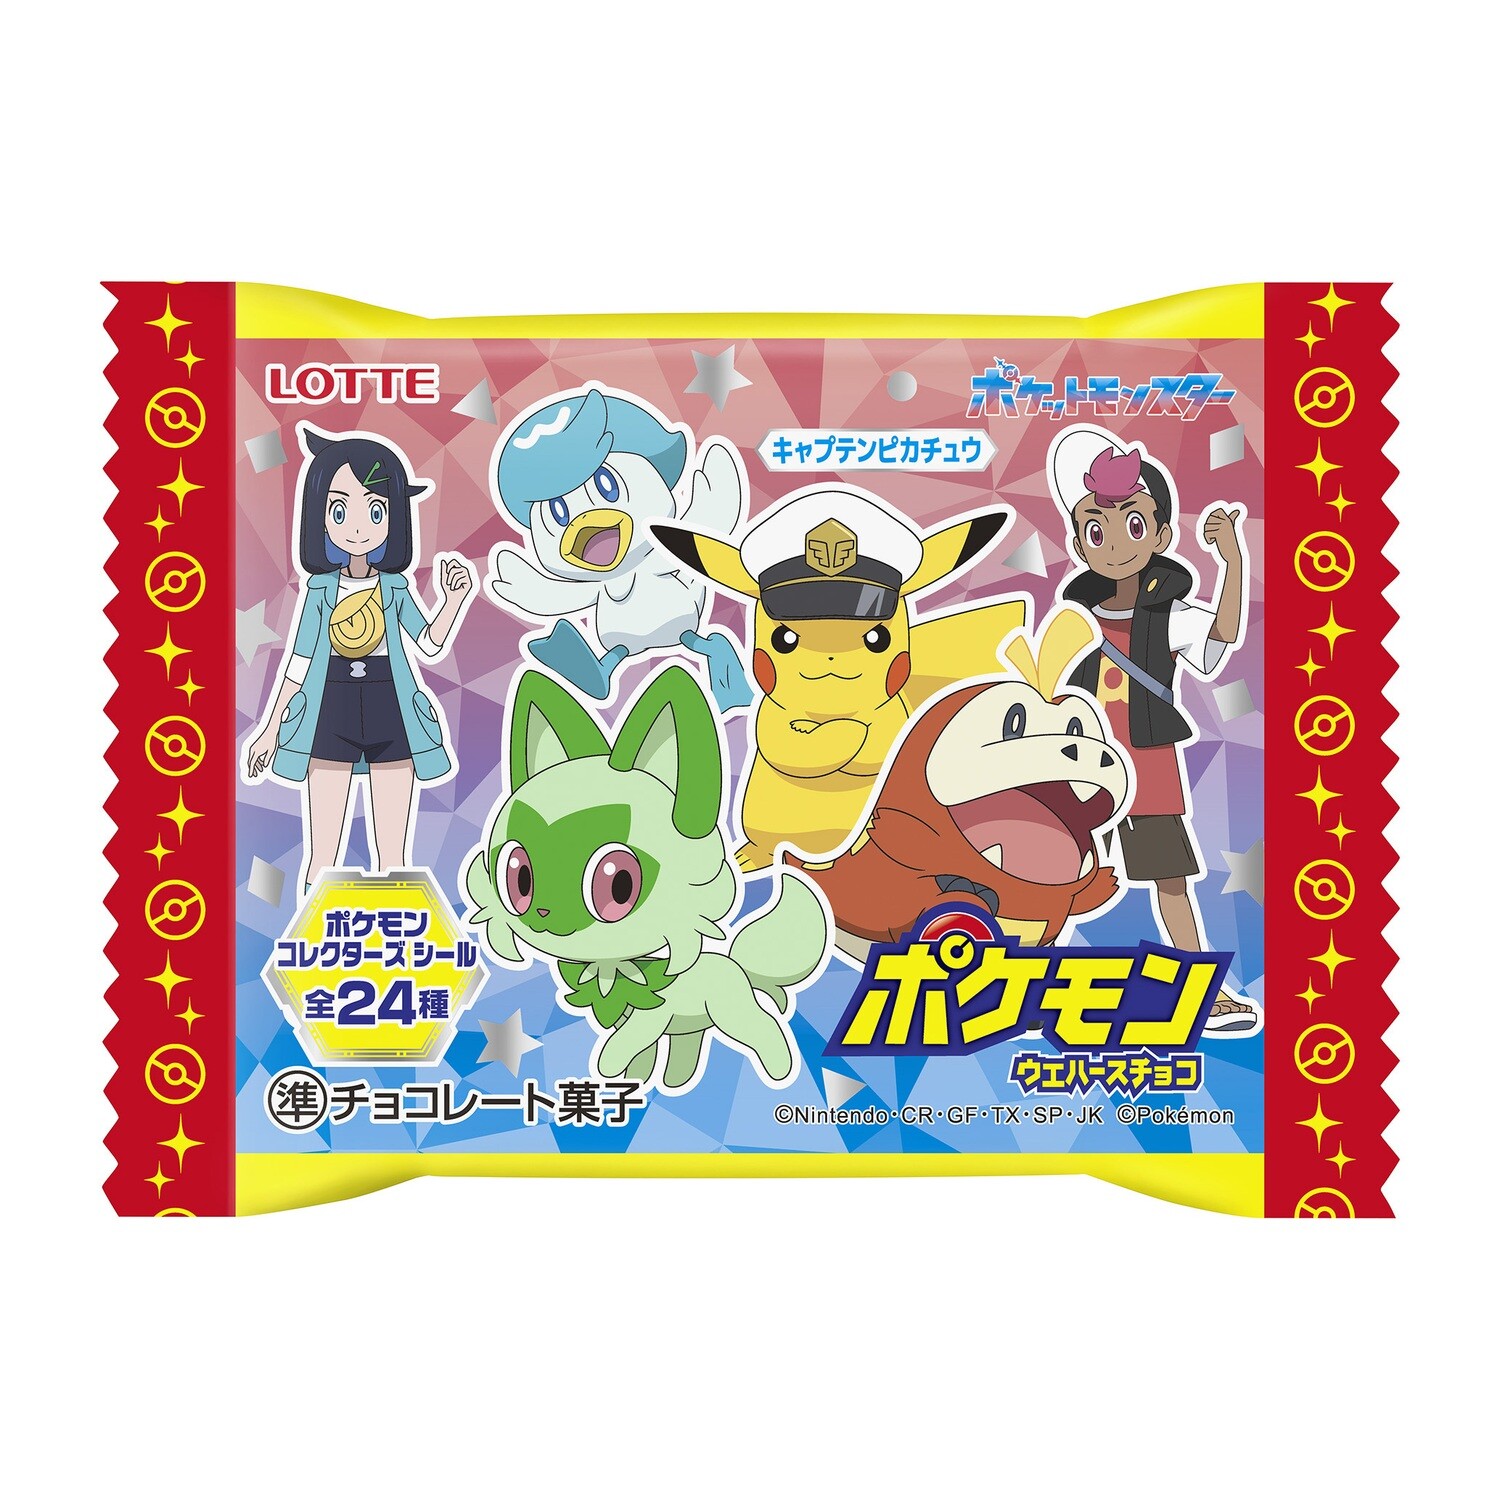 Lotte "Pokemon Wafer", Chocolate, a Card in it, 23g, 2 packs as 1 set